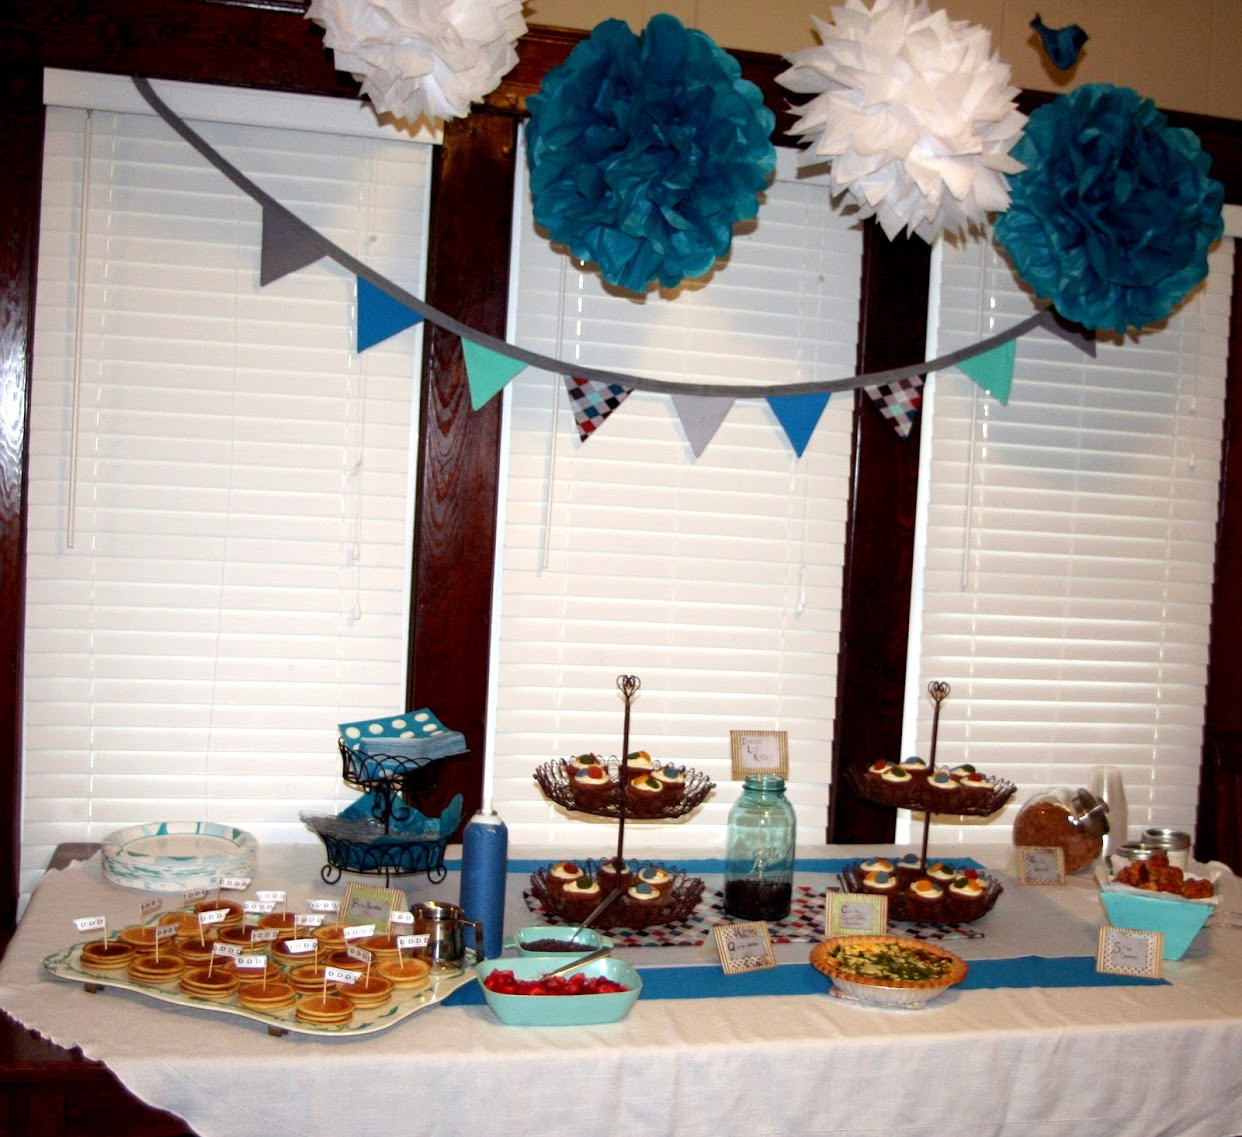 Decor For Baby Boy Shower
 Baby Shower Decorations For Boys Ideas